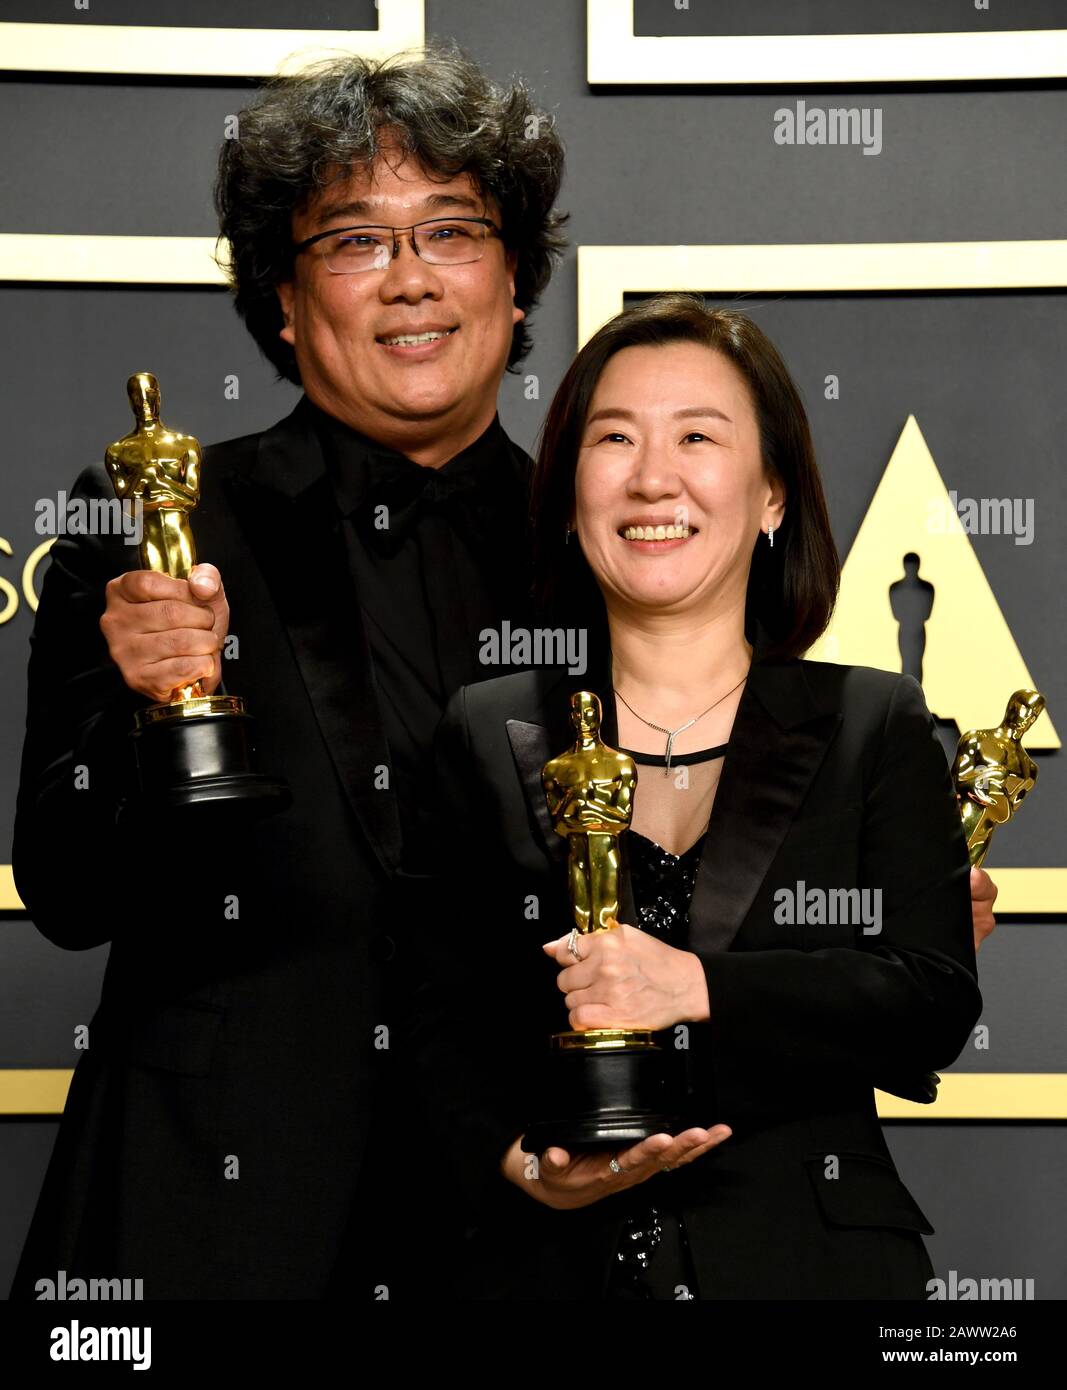 Bong Joon-ho and Kwak Sin-ae with their Oscars for Best Original Screenplay, International Feature Film, Best Director, and Best Picture for Parasite in the press room at the 92nd Academy Awards held at the Dolby Theatre in Hollywood, Los Angeles, USA. Stock Photo